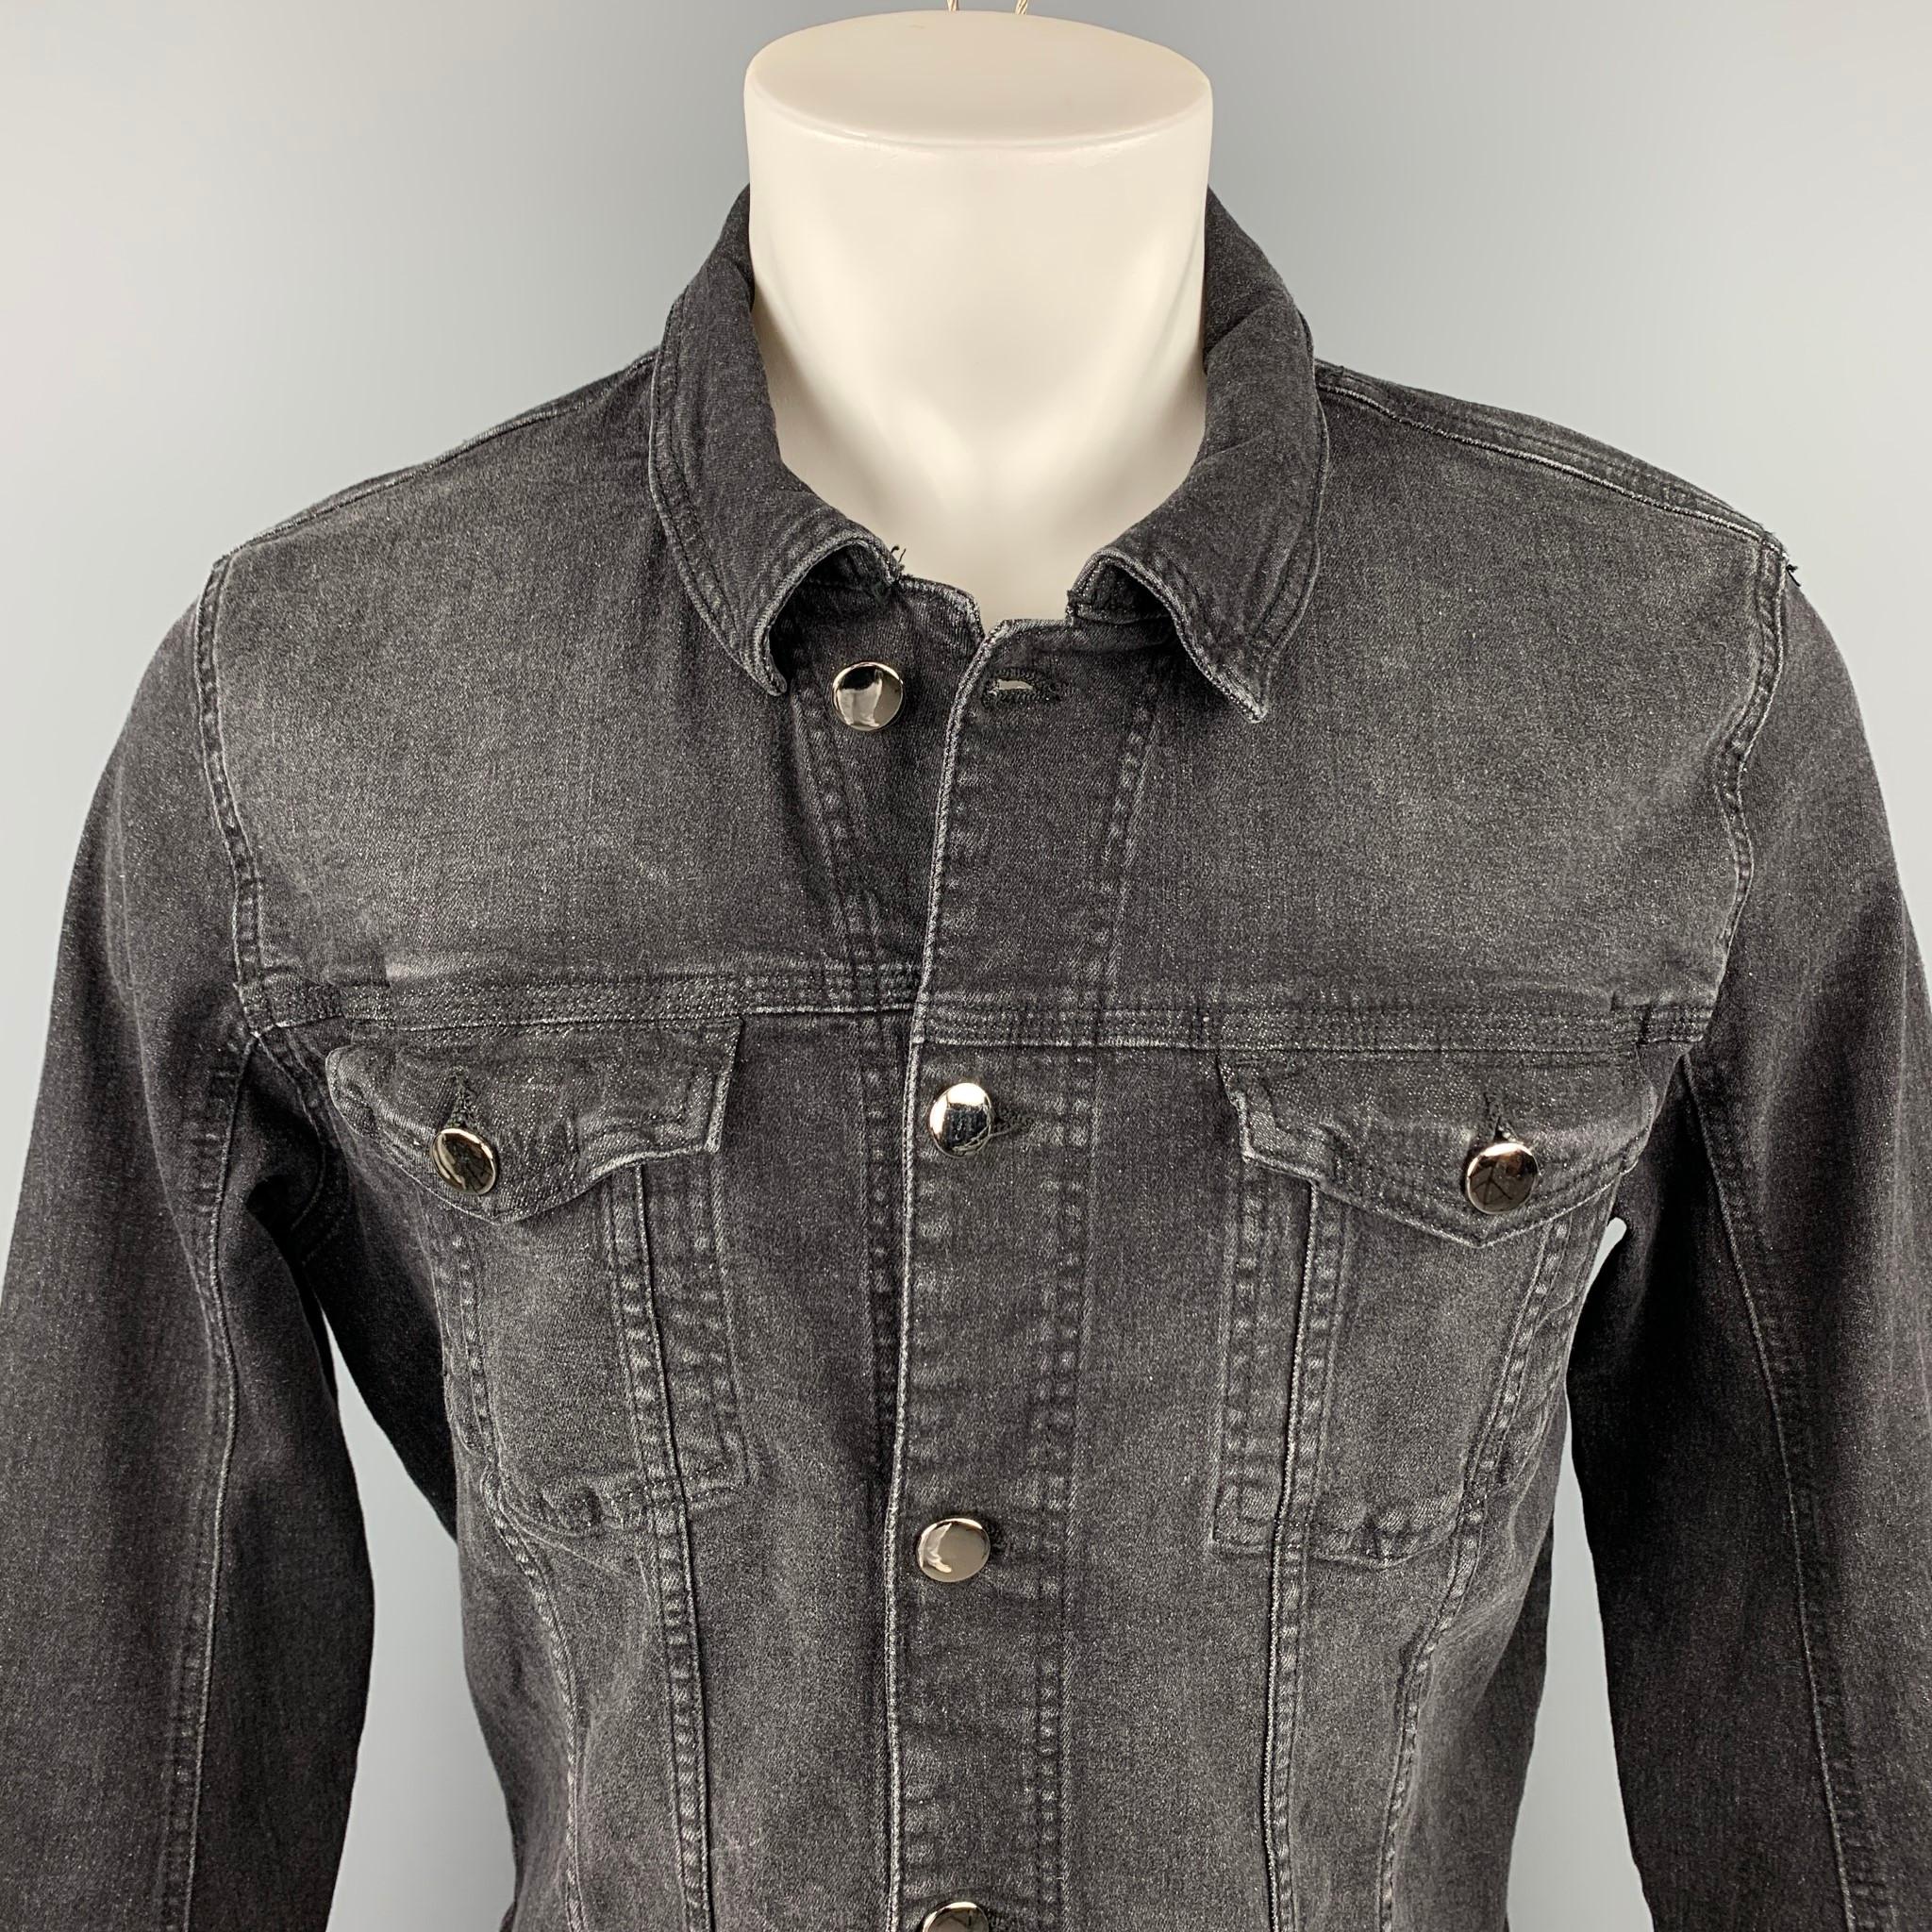 MAISON MARGIELA jacket comes in a charcoal cotton featuring a trucker style, front pockets, spread collar, and a silver metallic button closure. 

Very Good Pre-Owned Condition.
Marked: L

Measurements:

Shoulder: 18 in.
Chest: 41 in.
Sleeve: 26